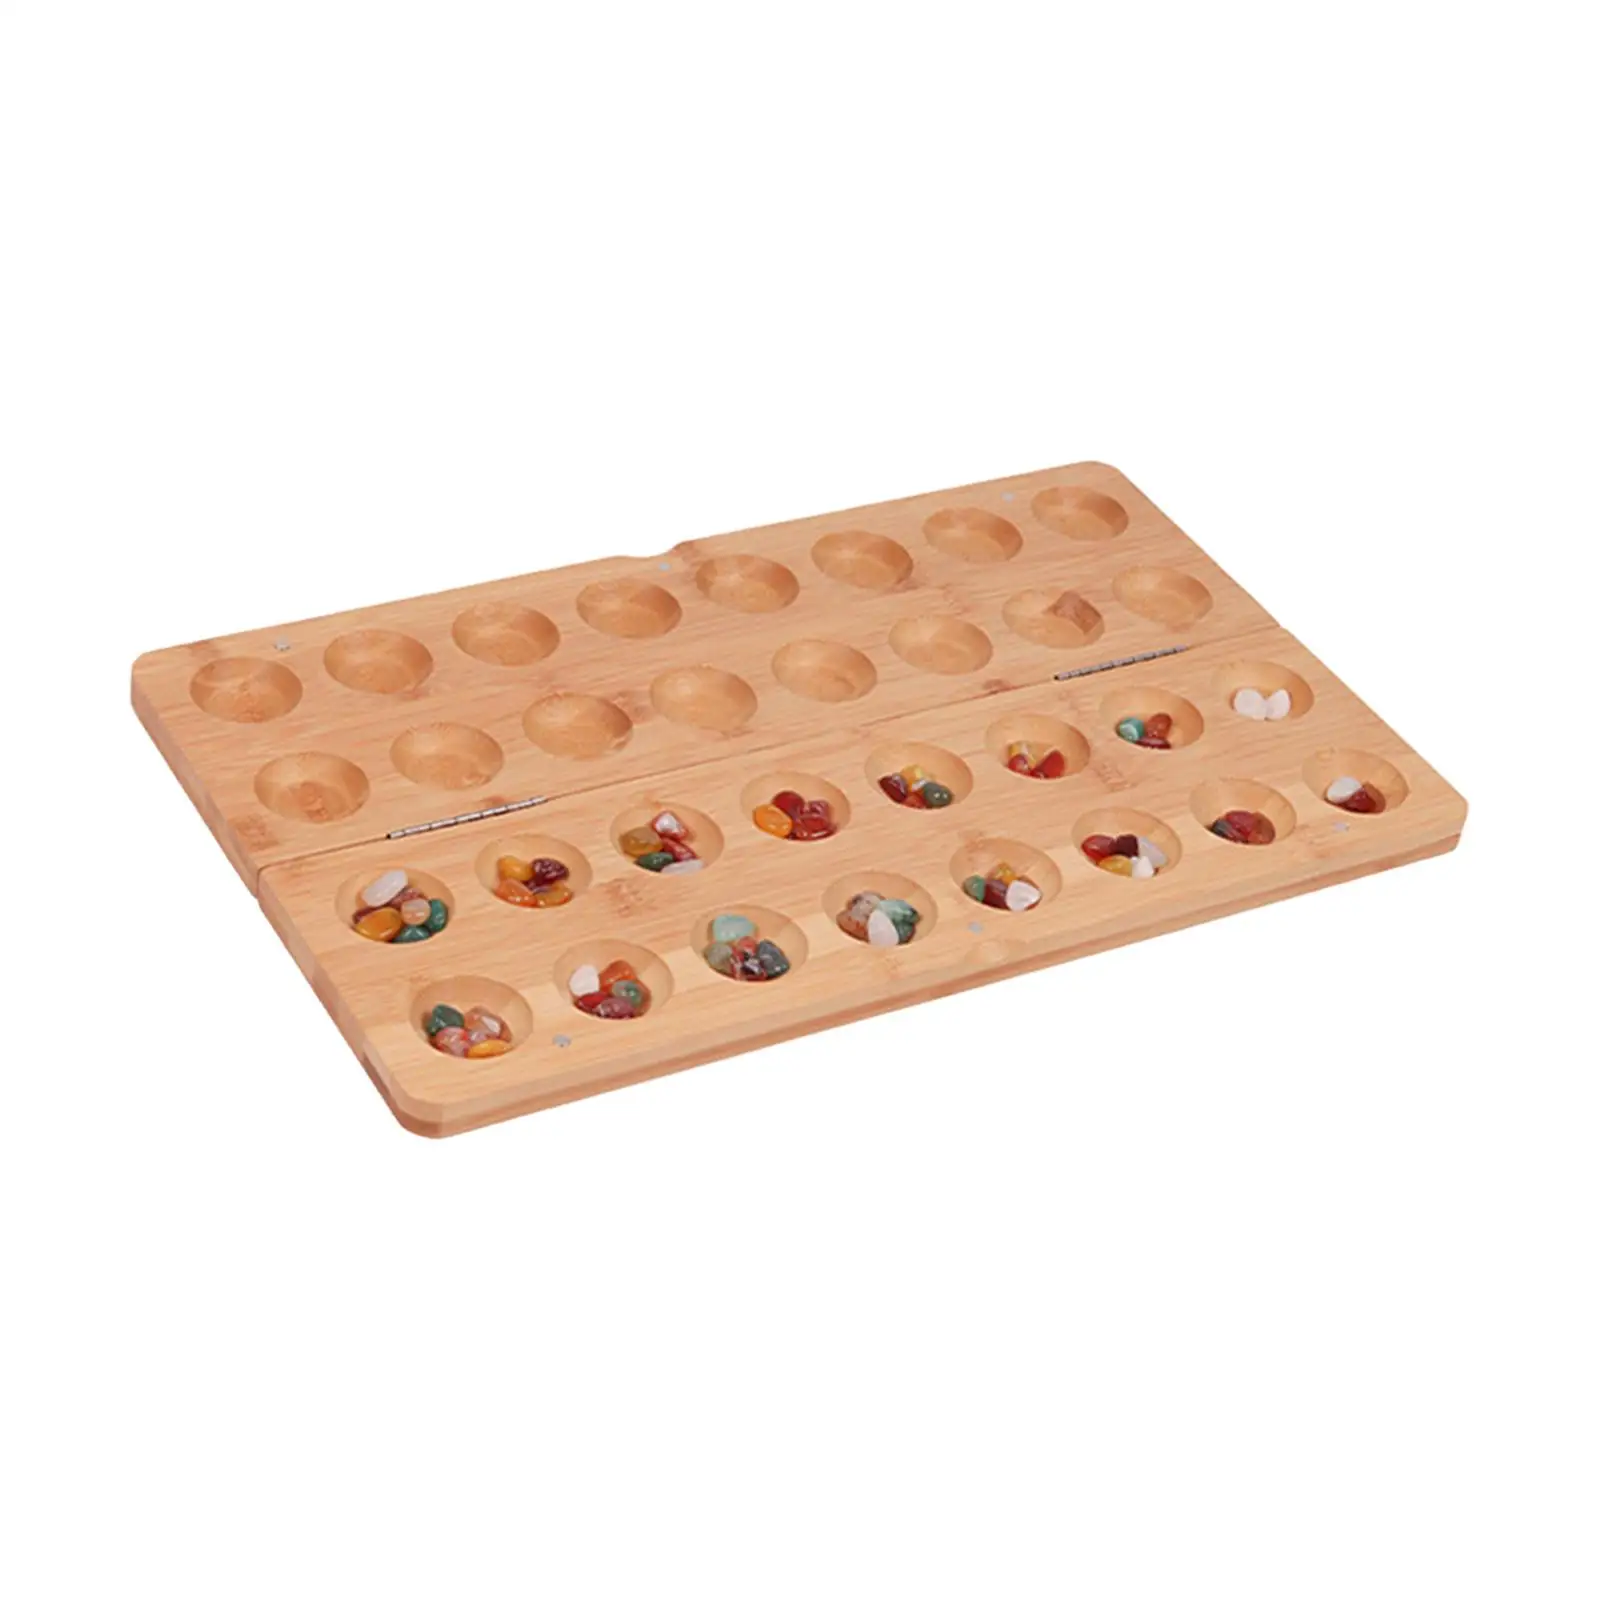 Mancala Board Games Party Favors Entertainment for Family Game Night Christmas Gift 65 Colored Stones Ancient Strategy Game